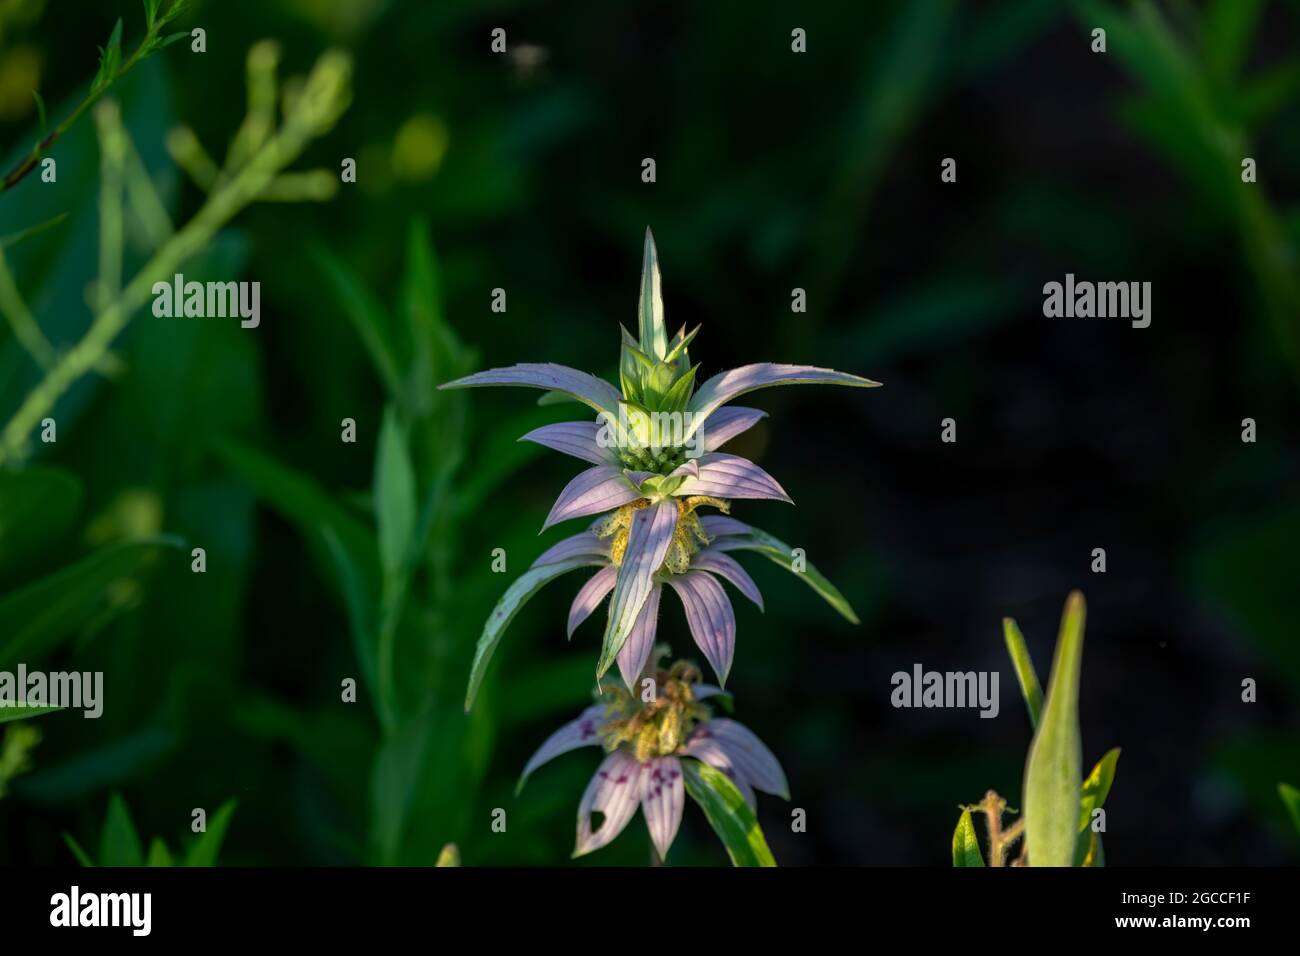 The common name spotted beebalm and horsemint (Monarda punctata ). Native Americas flower. Stock Photo